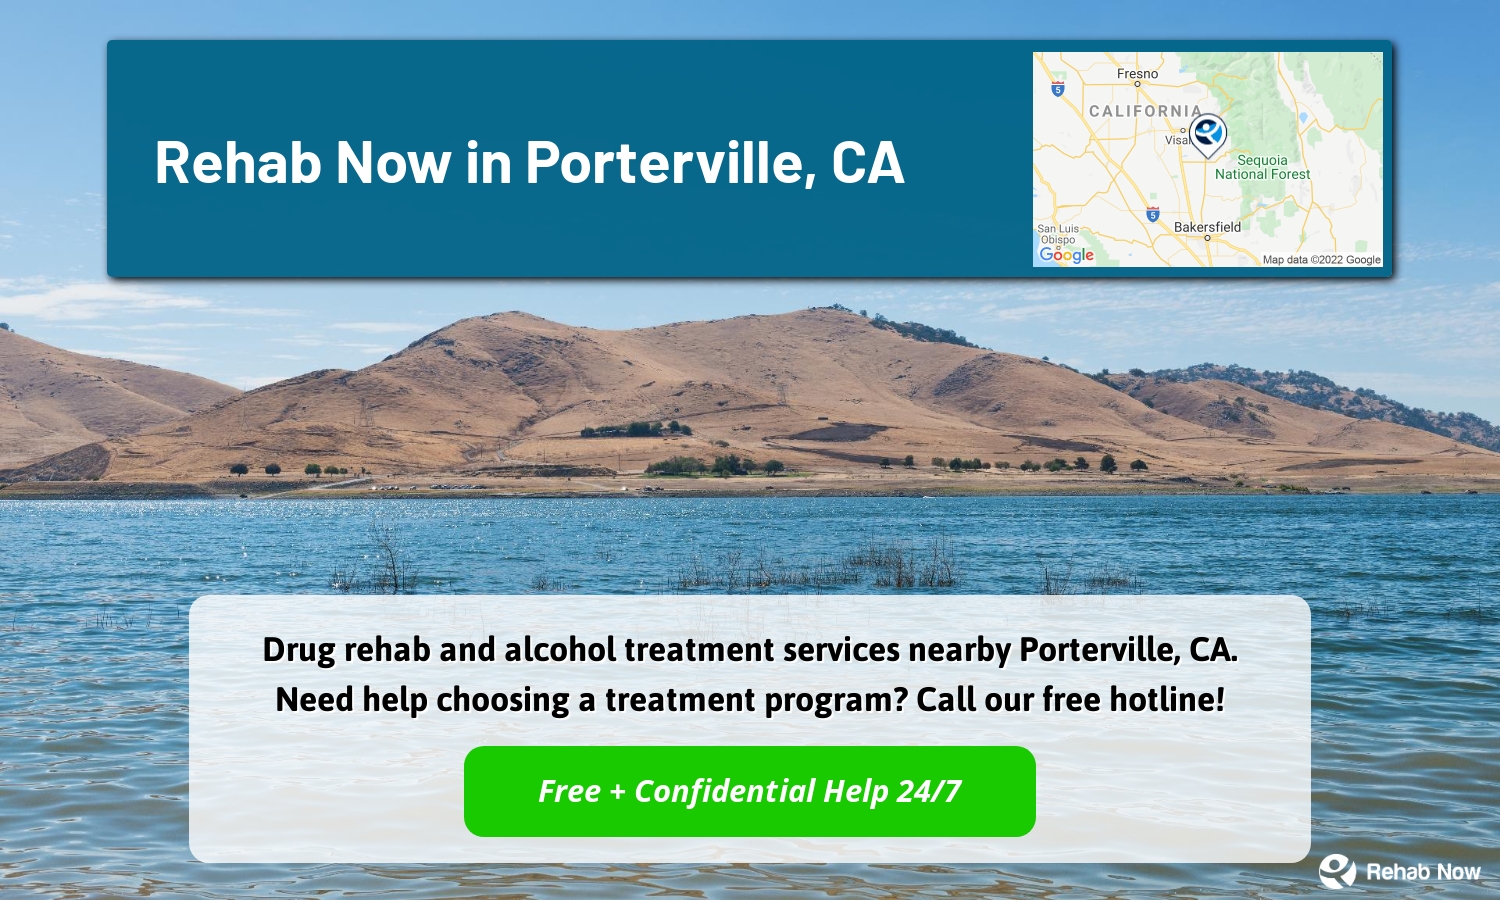 Drug rehab and alcohol treatment services nearby Porterville, CA. Need help choosing a treatment program? Call our free hotline!